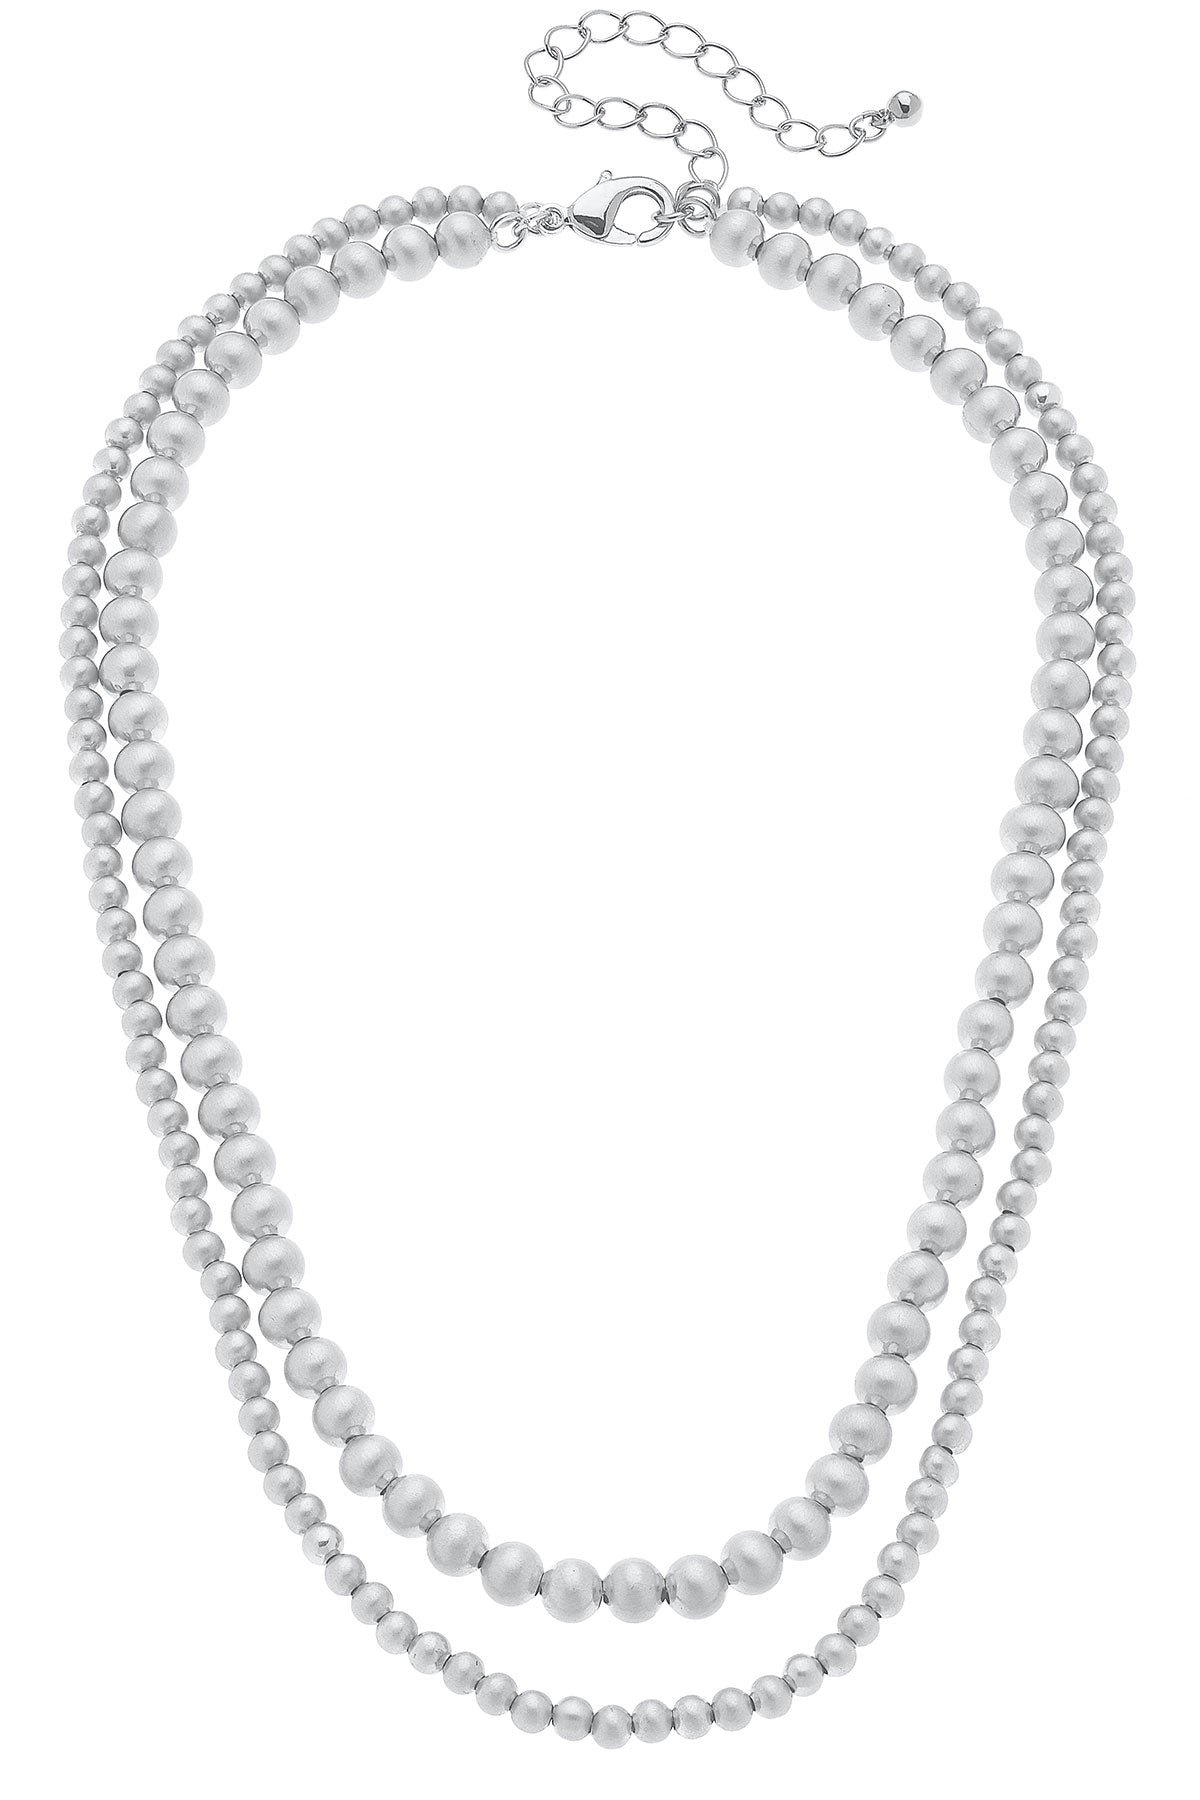 Ember 2-Row Ball Bead Necklace in Satin Silver